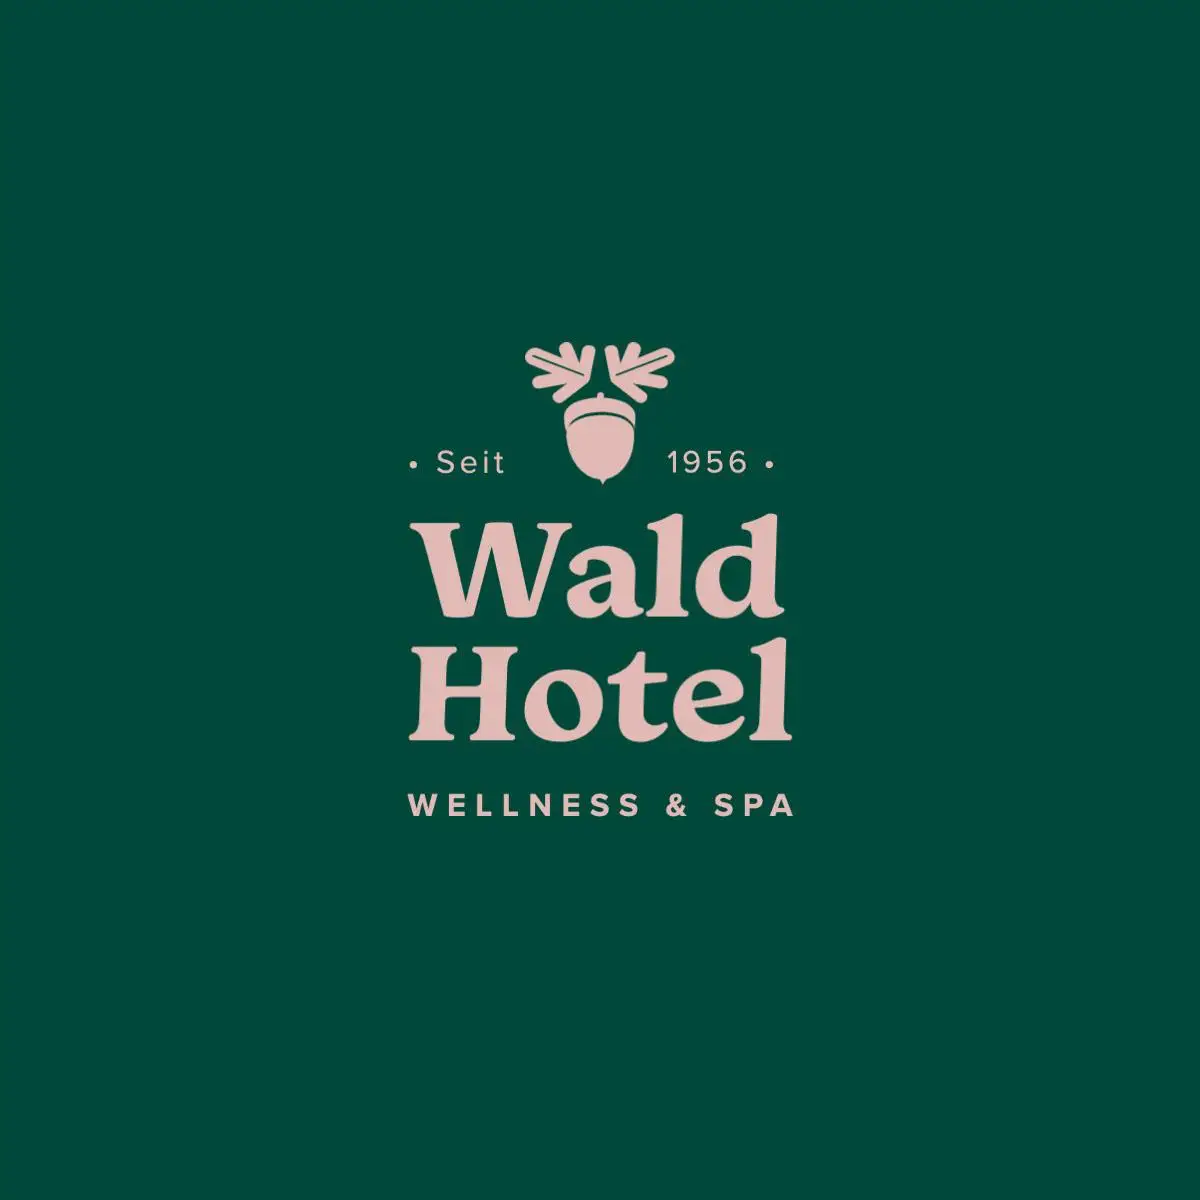 Green and Pink Rustic Hotel Logo